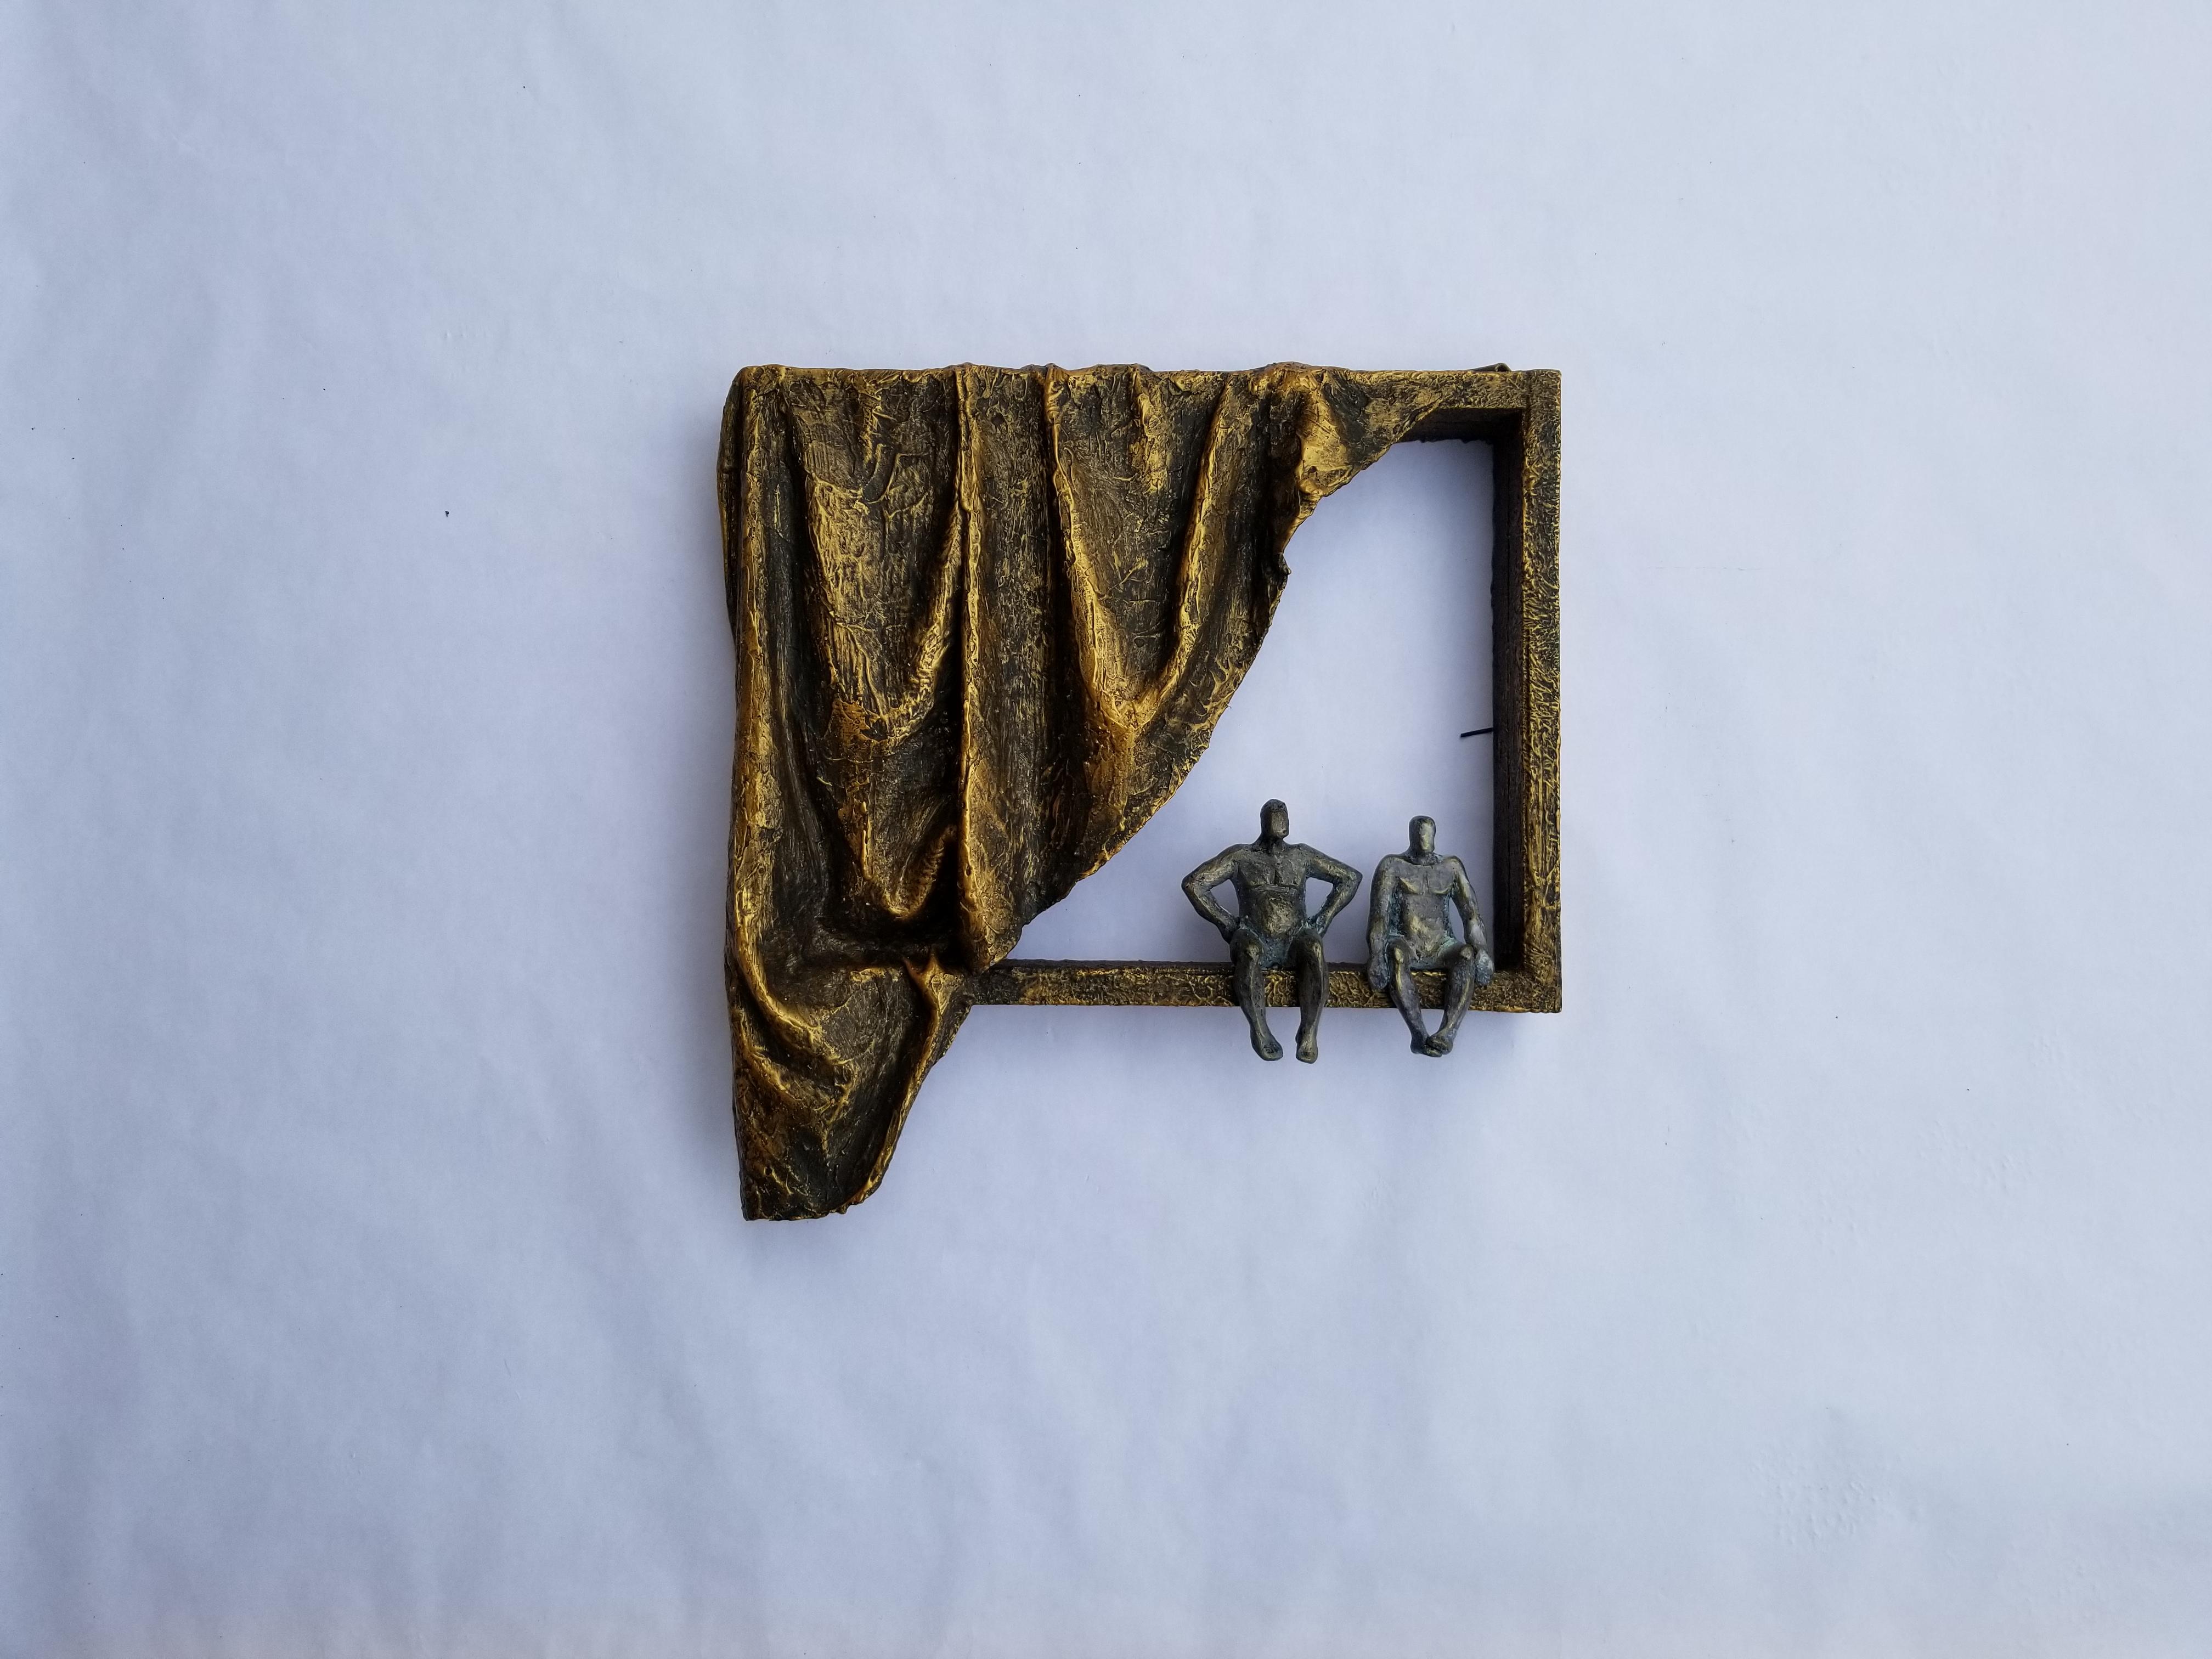 <p>Artist Comments<br>Resin figures, meticulously painted to resemble bronze, rest on a textured frame. As a part of the Windows of Hope series, this piece symbolizes individual freedom amidst the challenges of solitude in today's world. The image